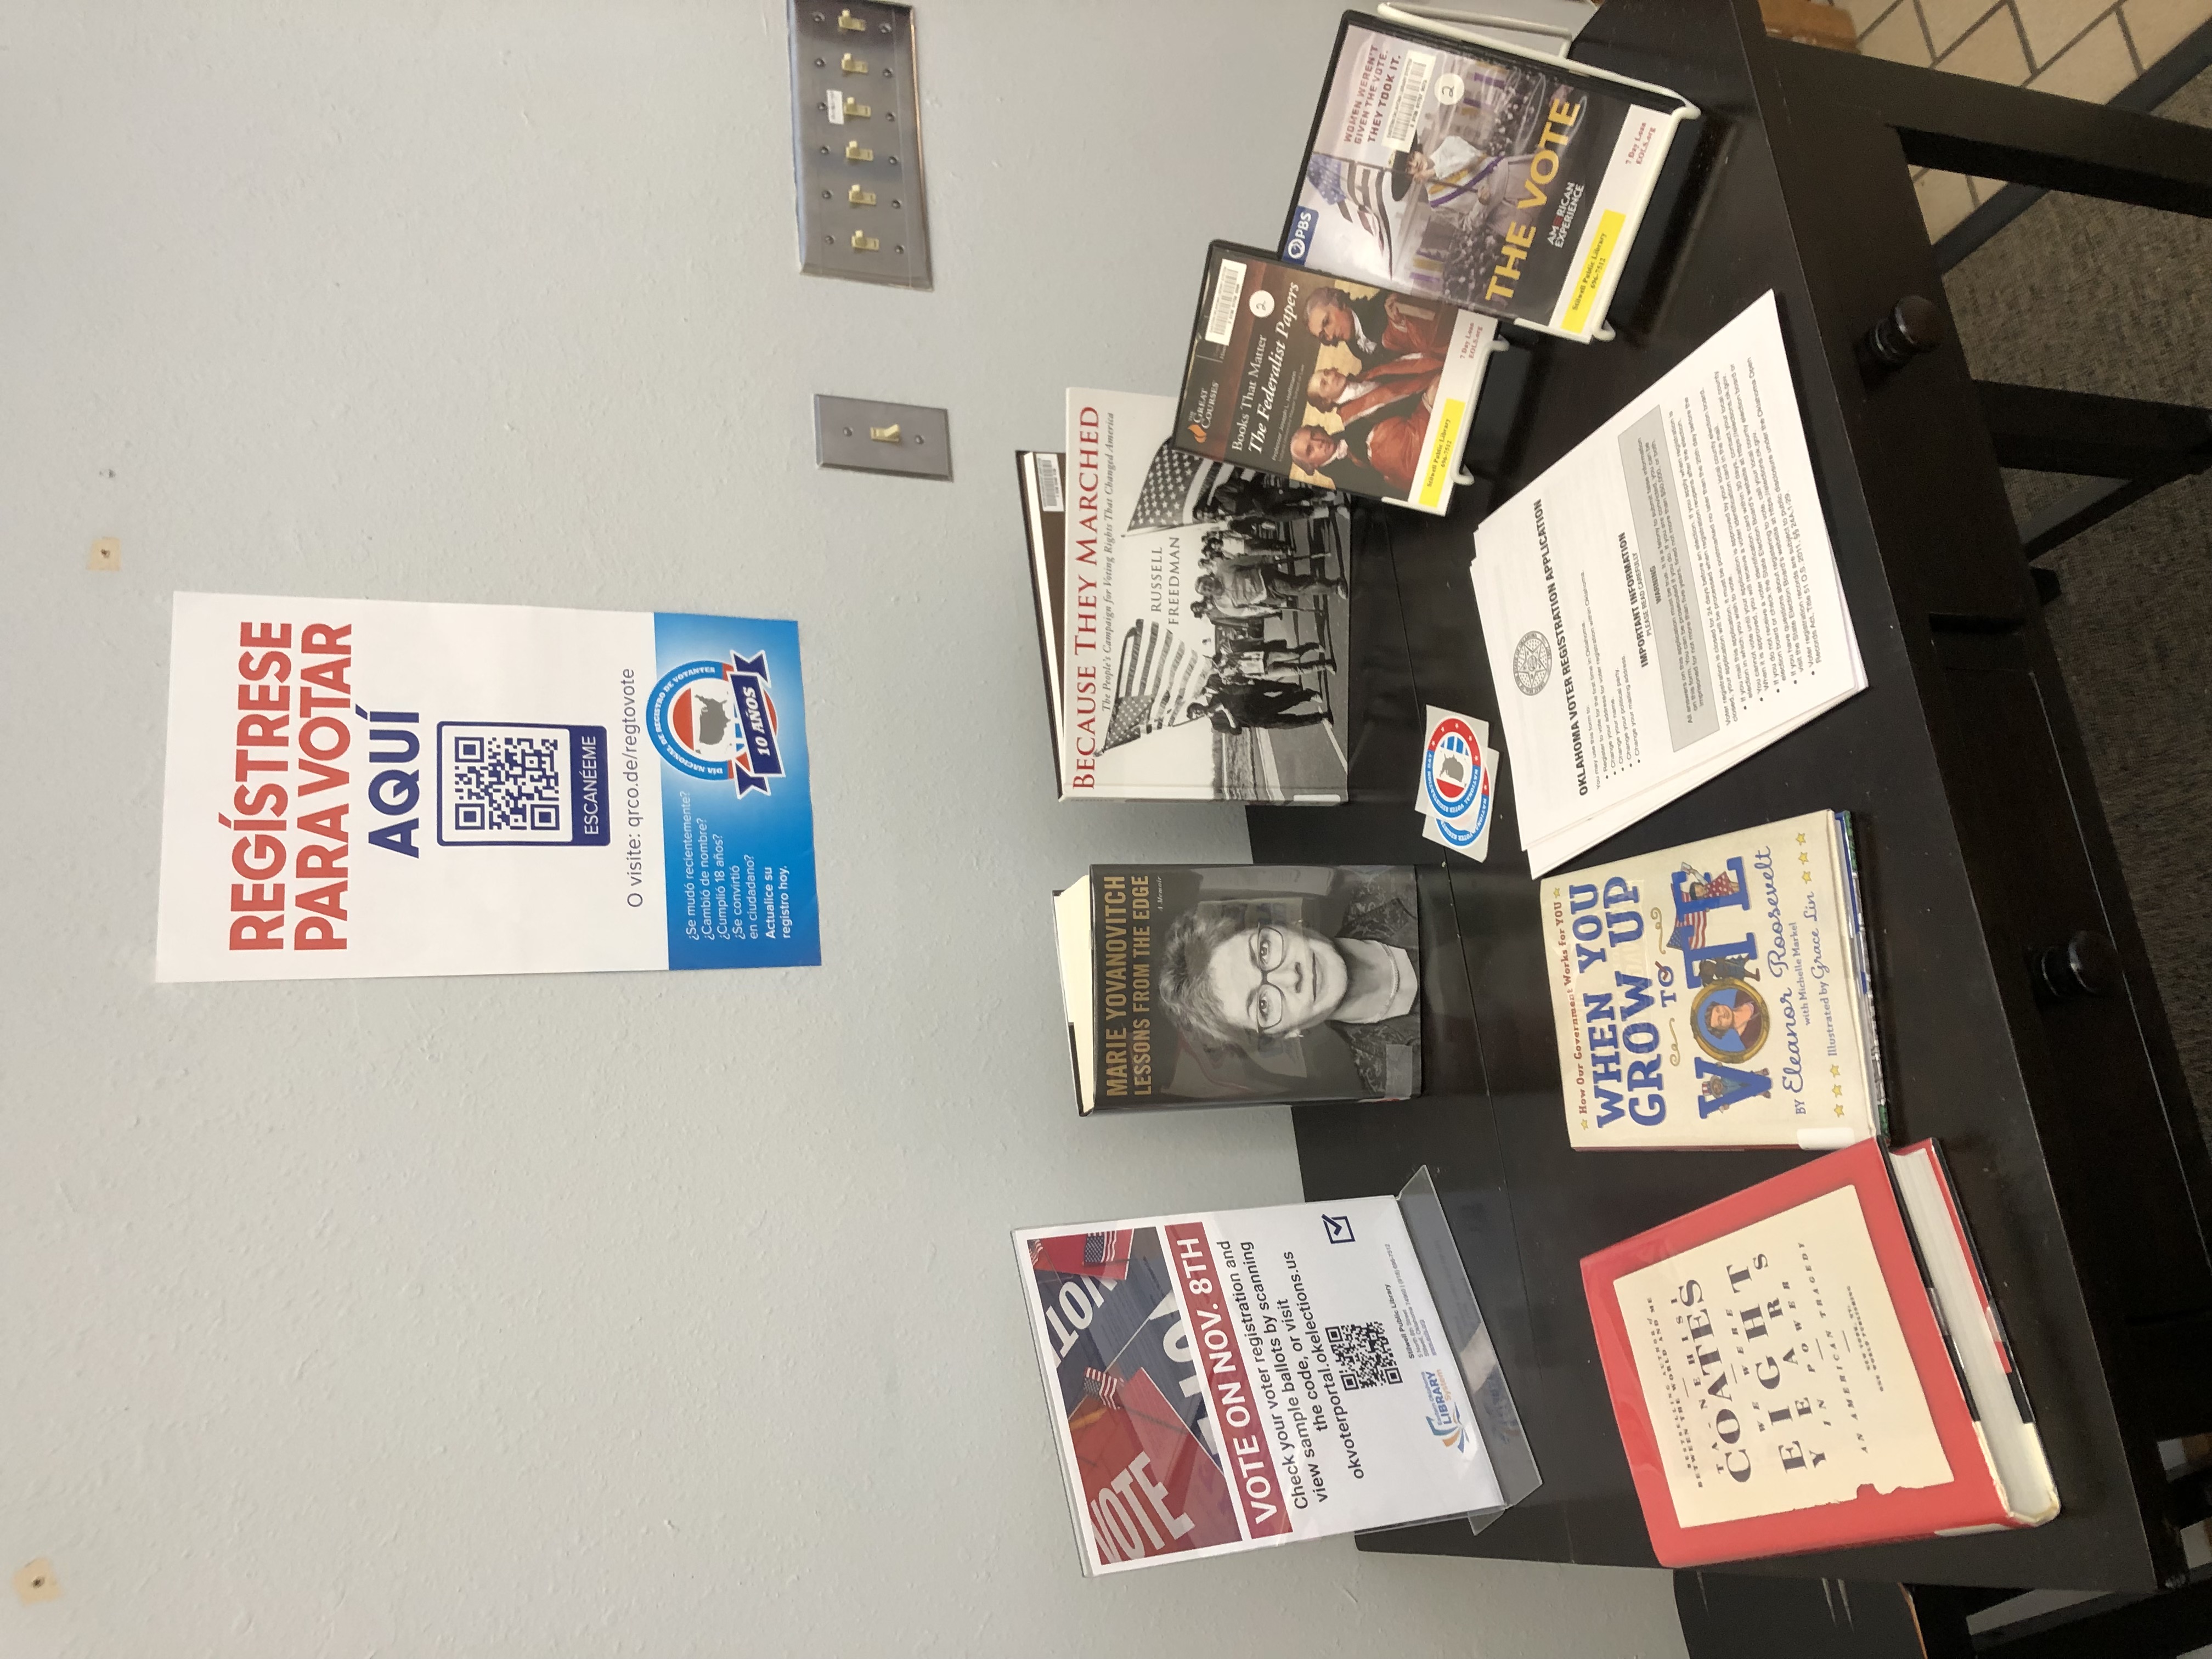 Voter registration book display at Stilwell Public Library with Spanish language sign